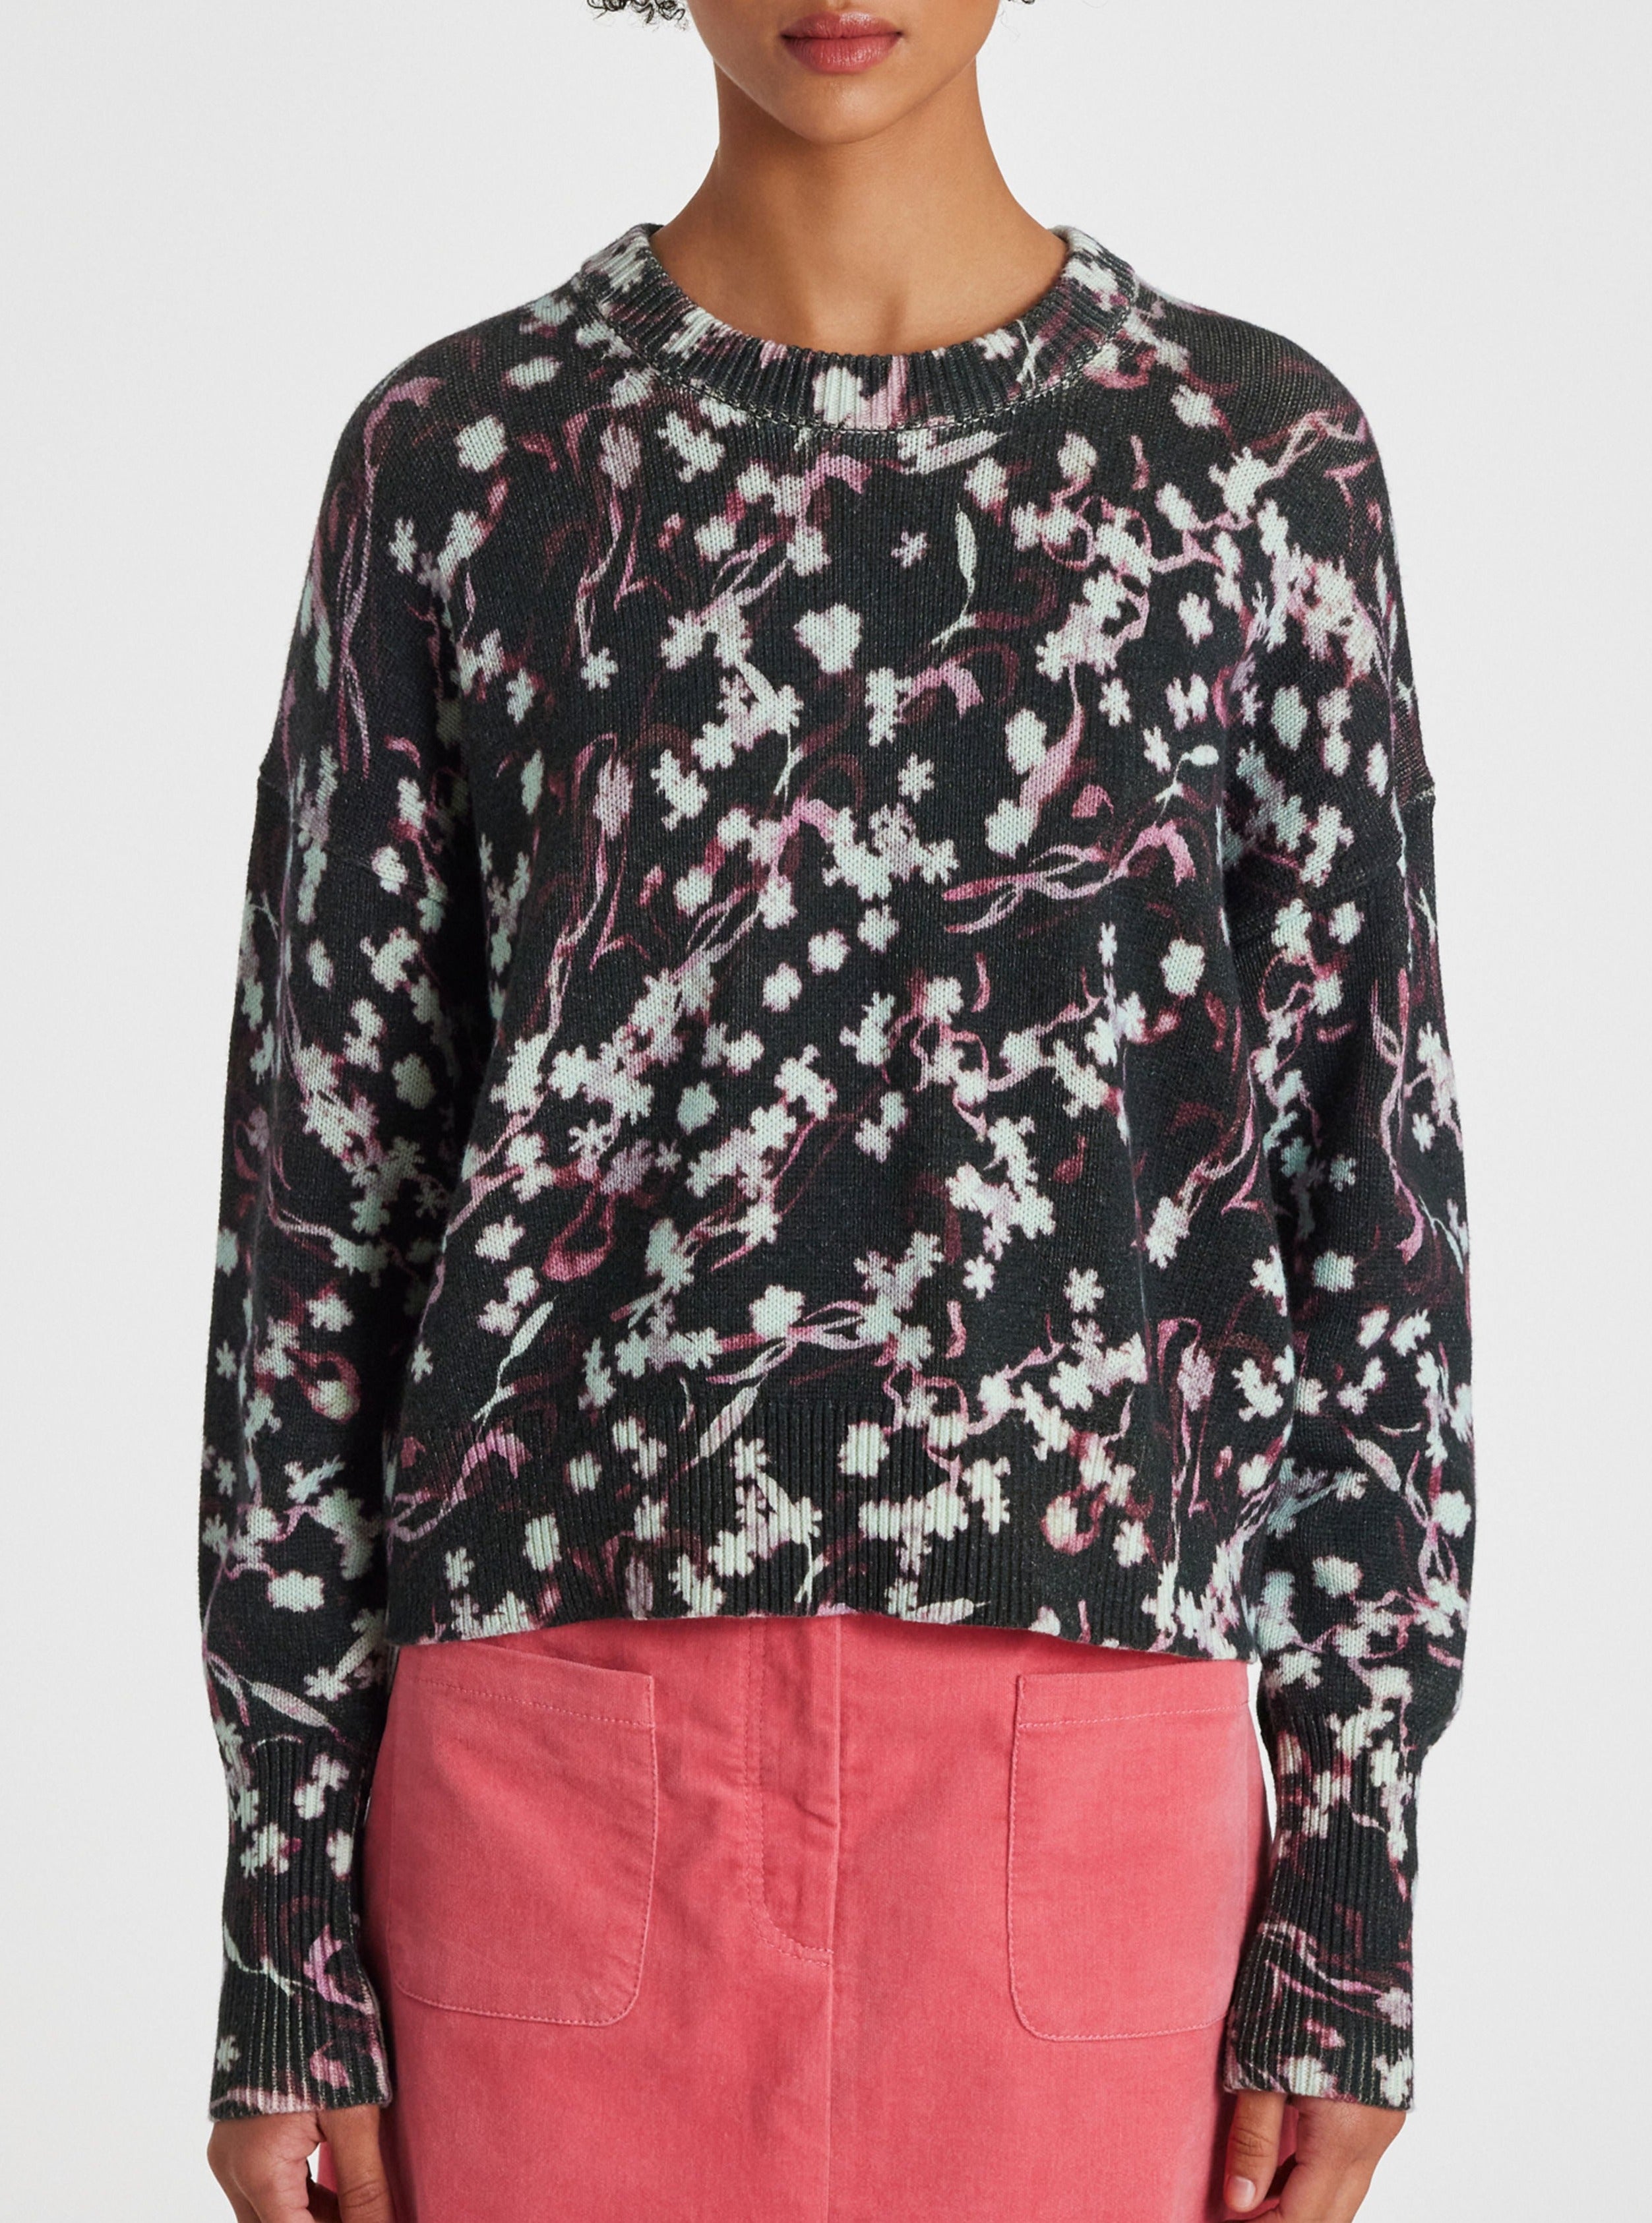 Paul Smith 'Wetlands Floral' Print Sweater